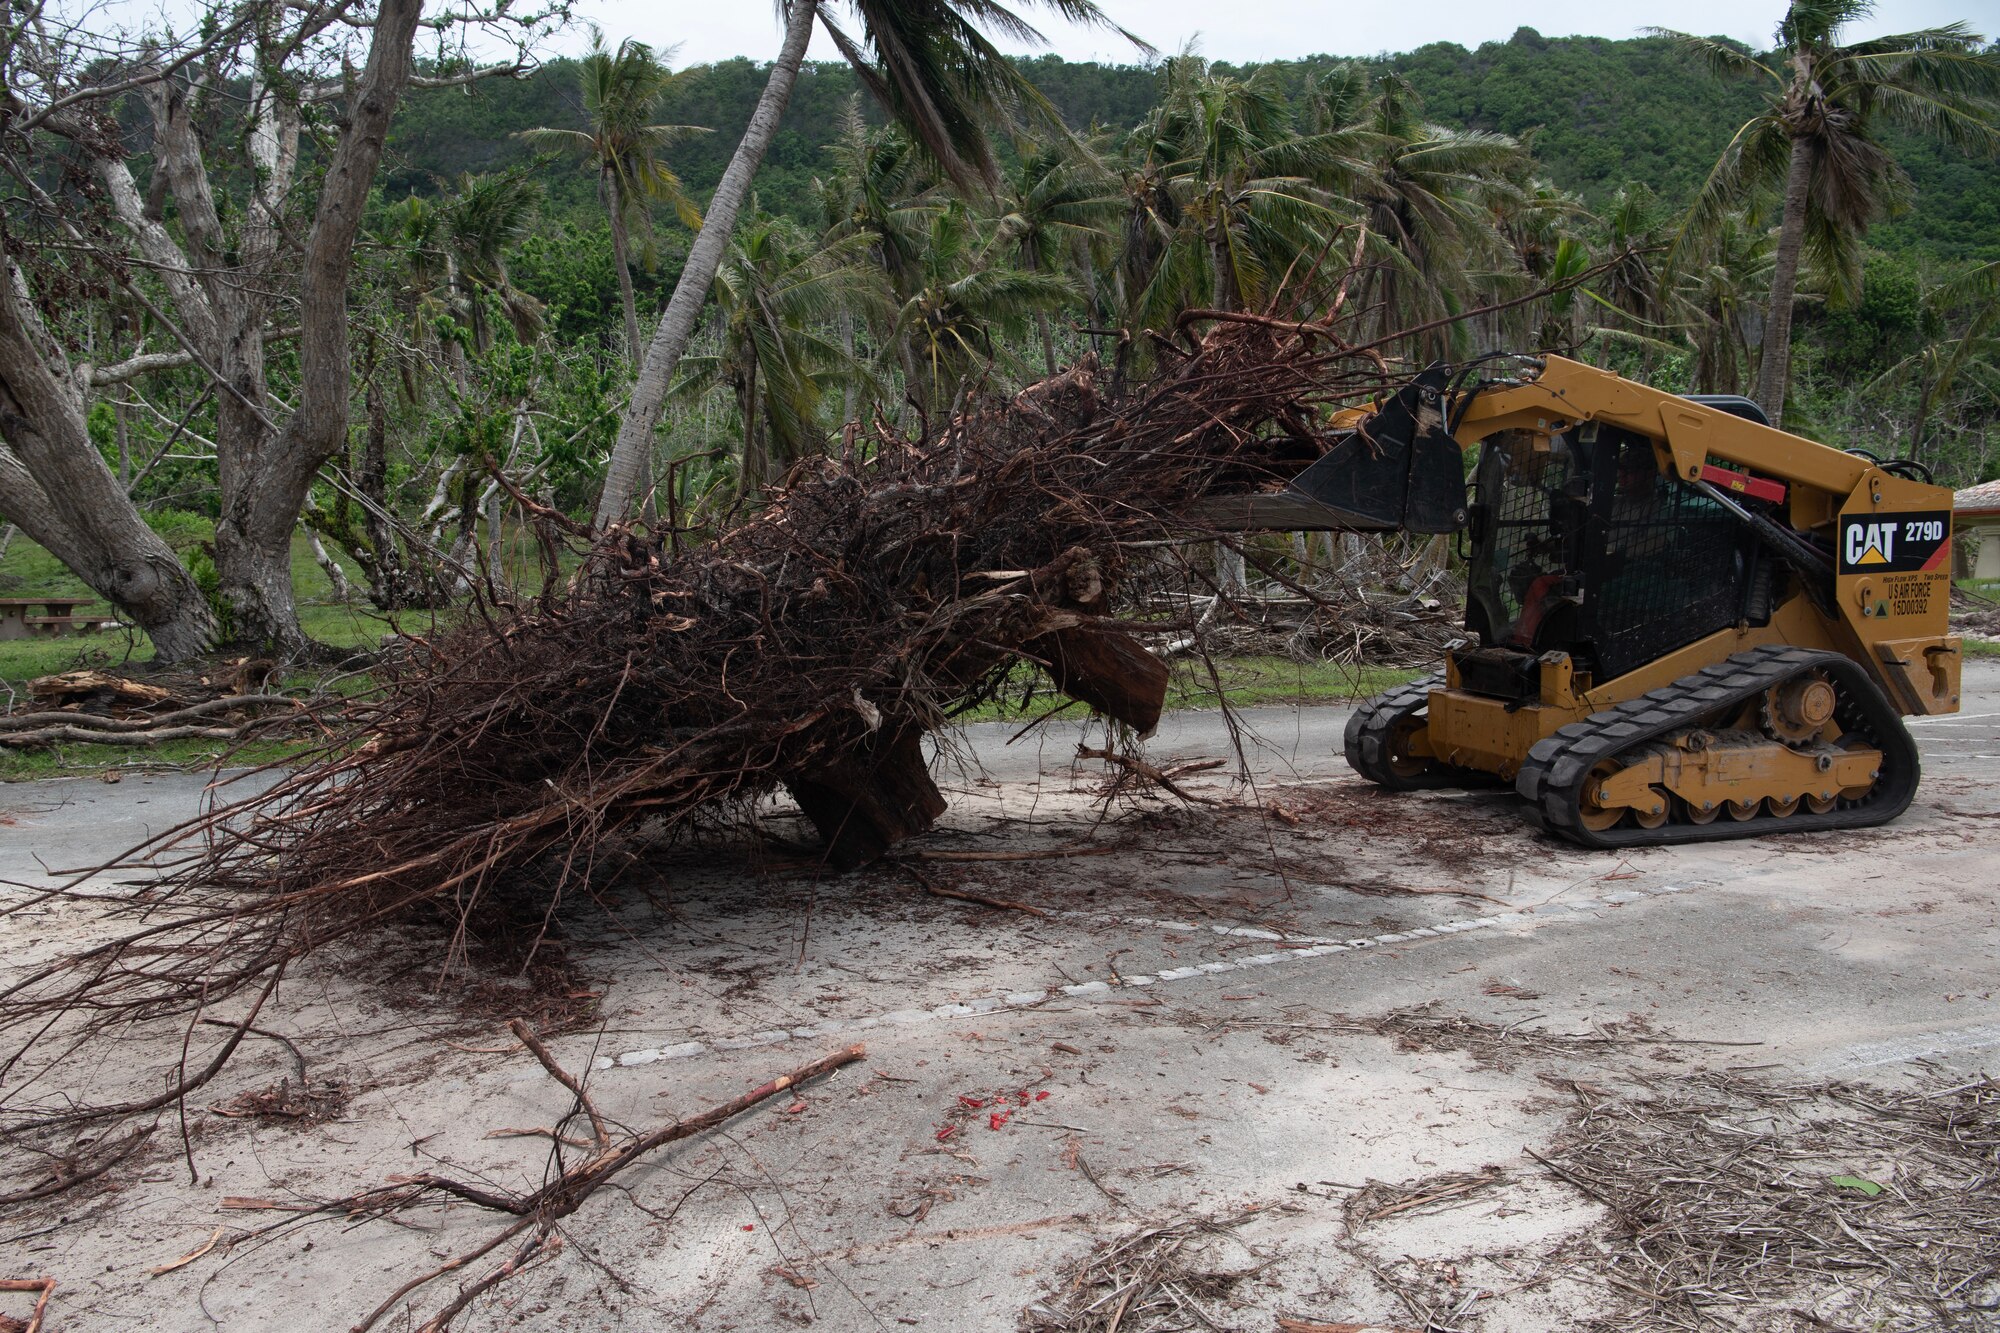 An Airman uses a compact track loader to lift large tree roots.